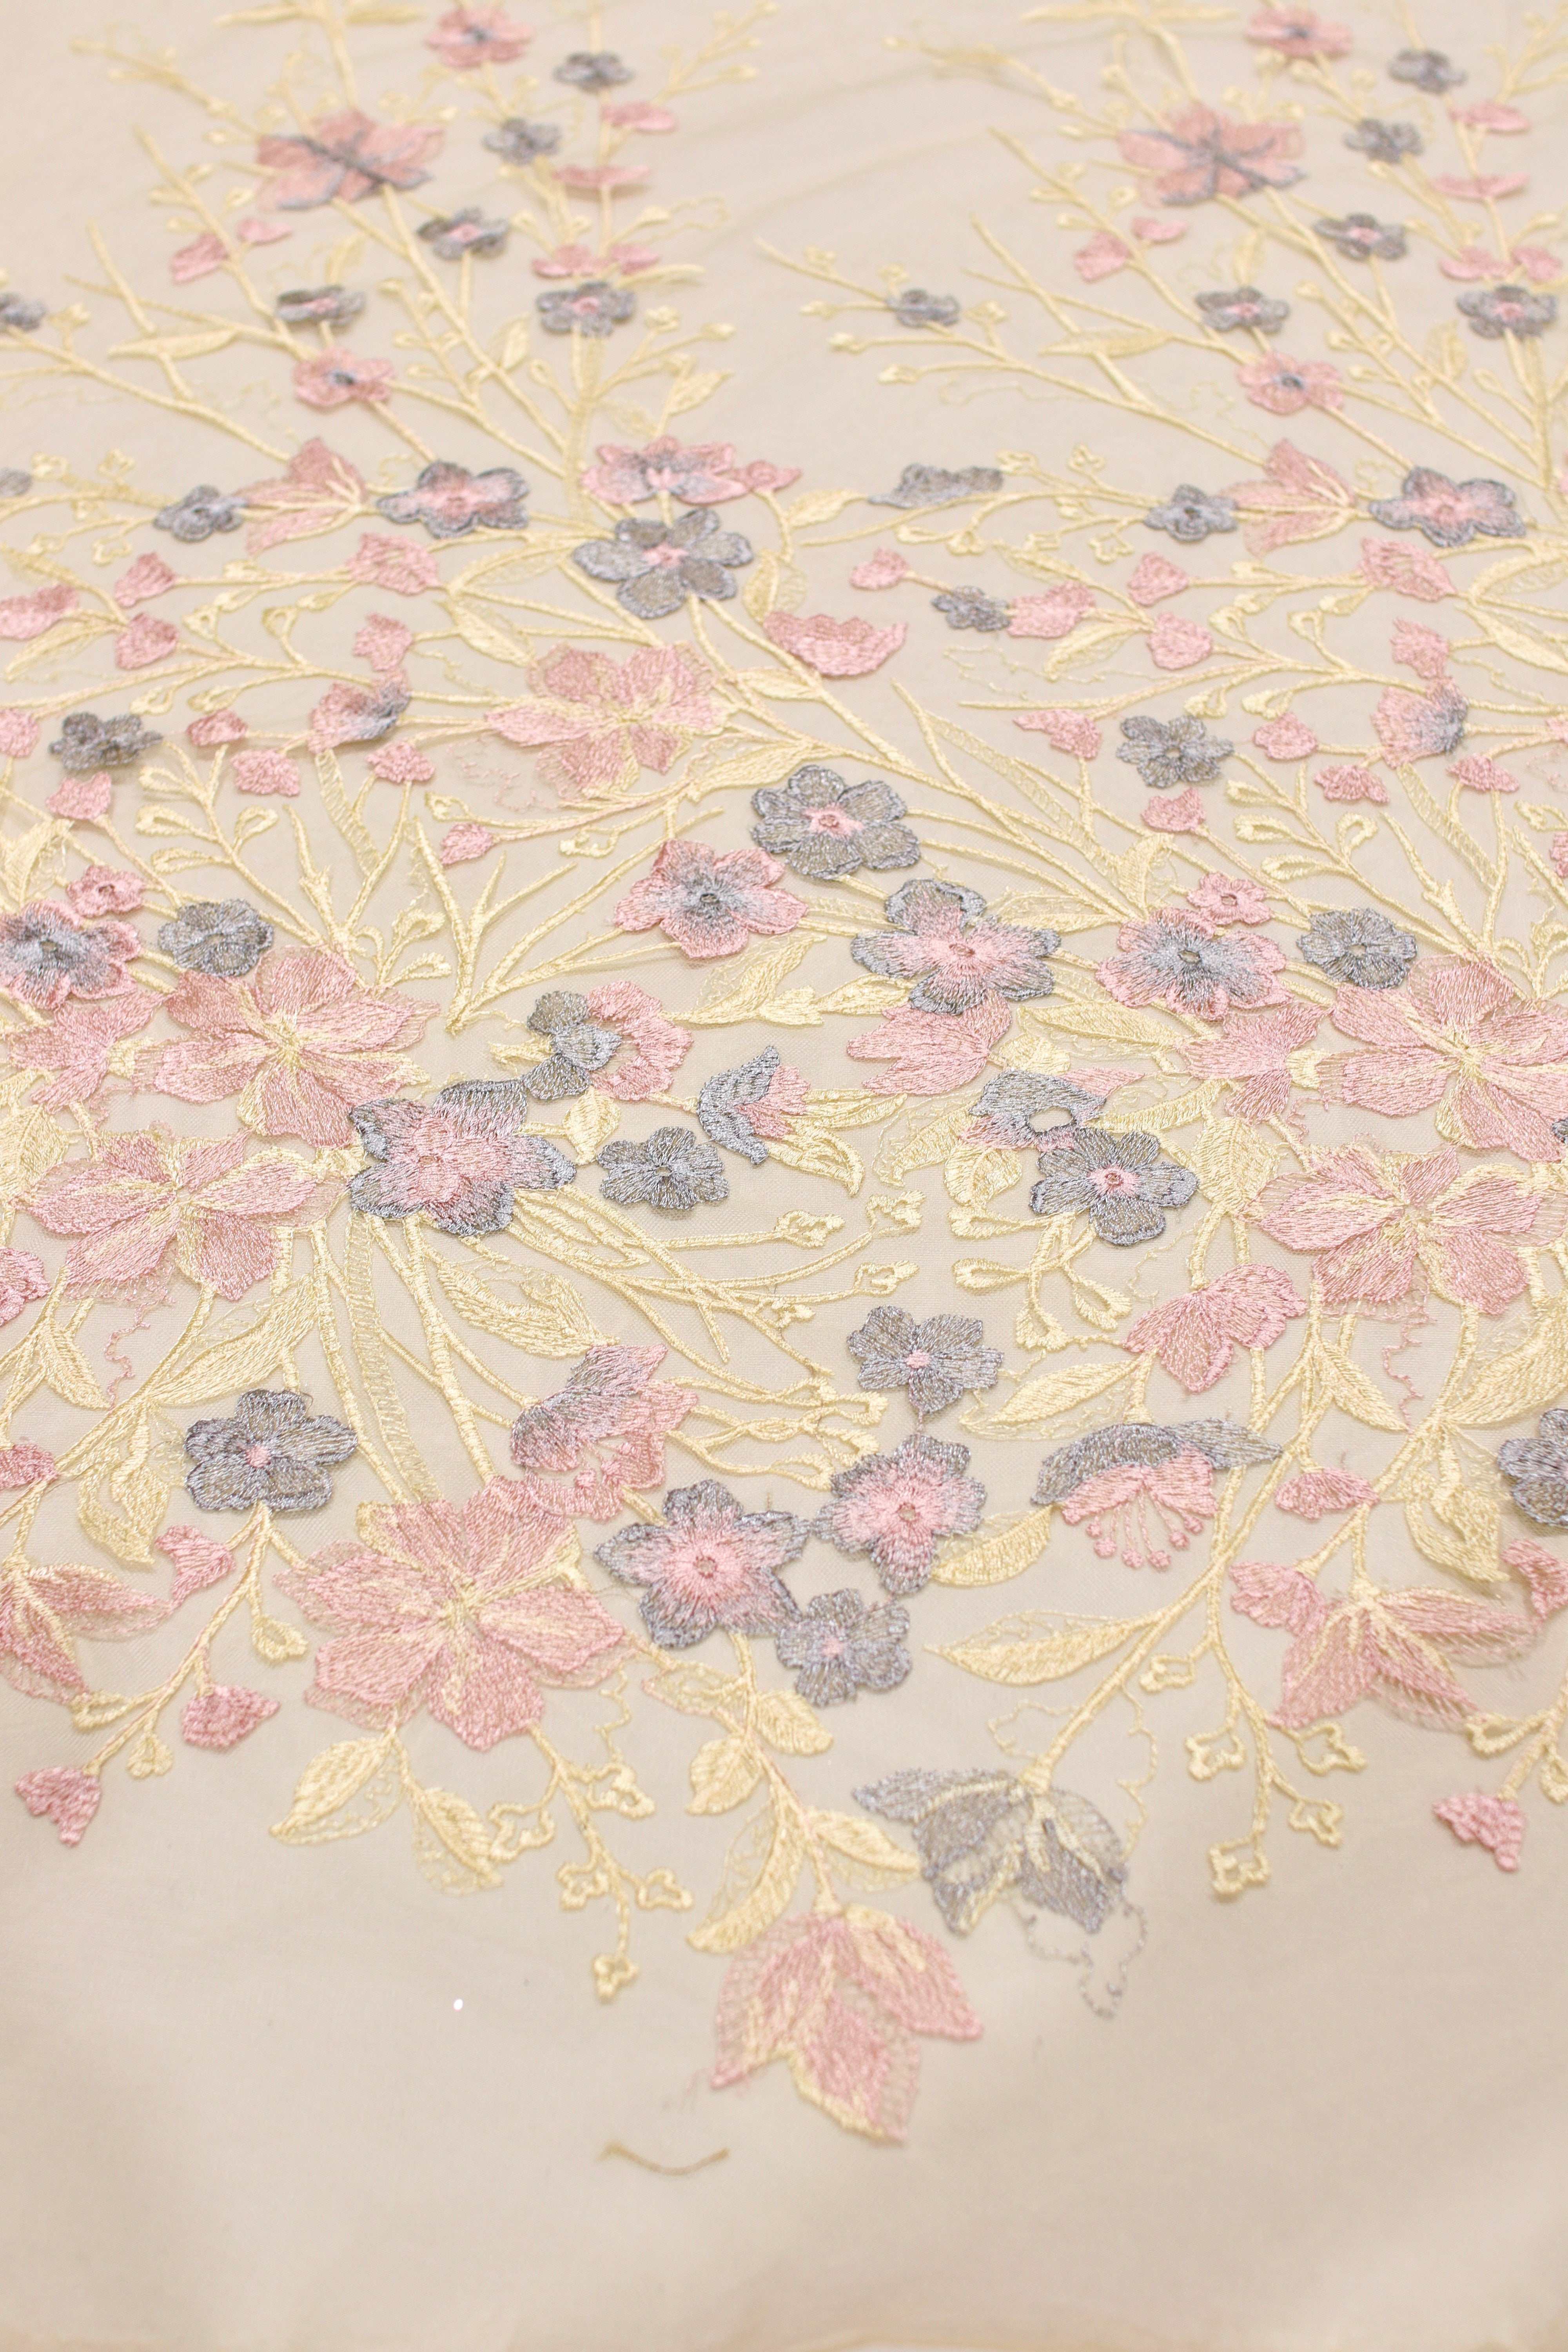 DRAMATIC FLORAL PRINT EMBROIDERY 3